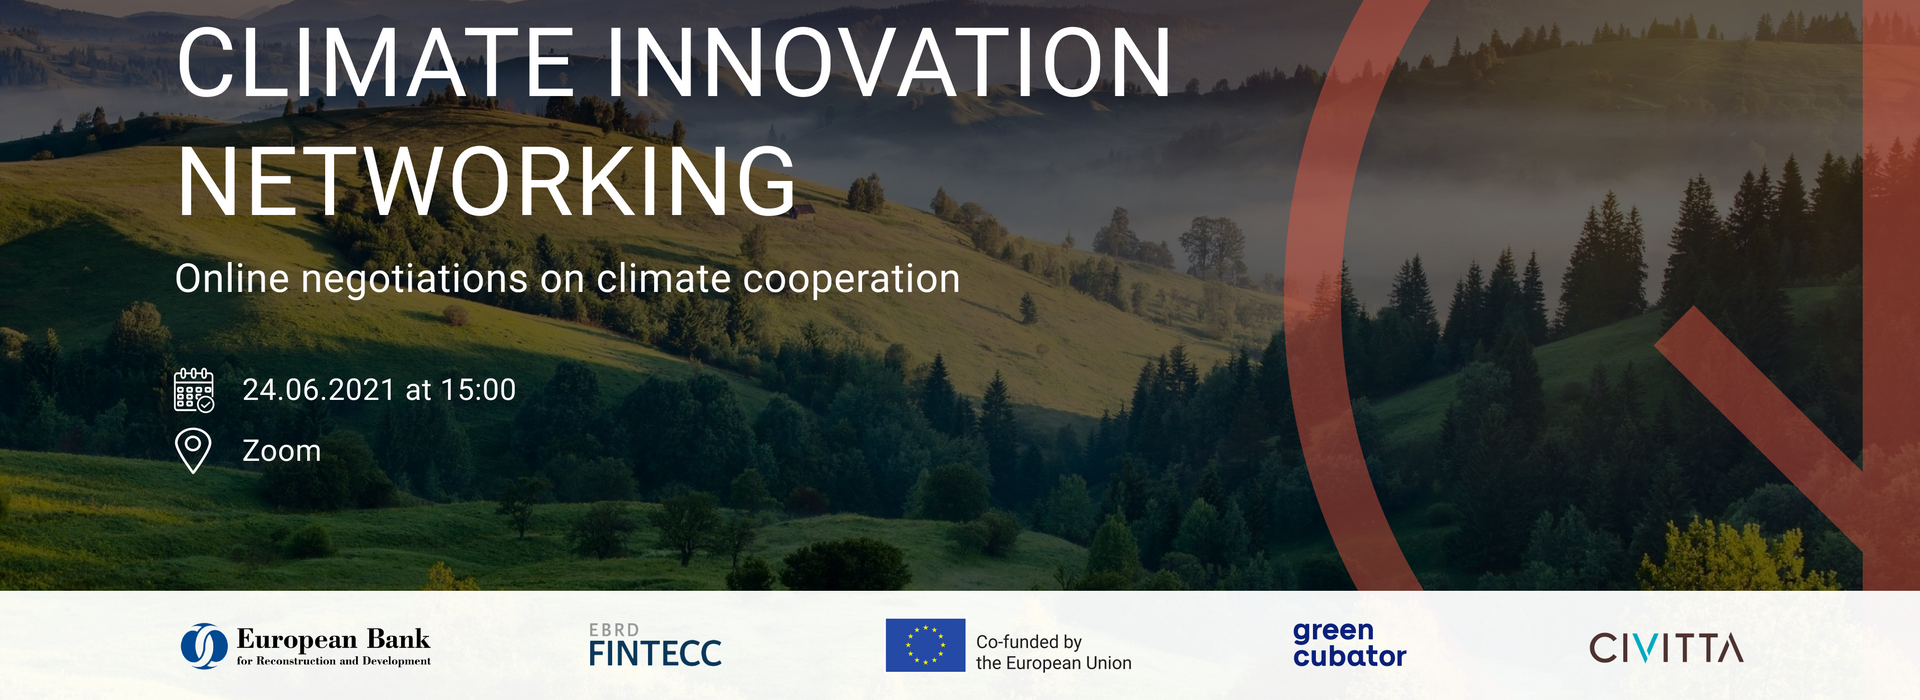 Climate Innovation Networking: Making Connection between Cleantech Businesses in Ukraine and Belarus